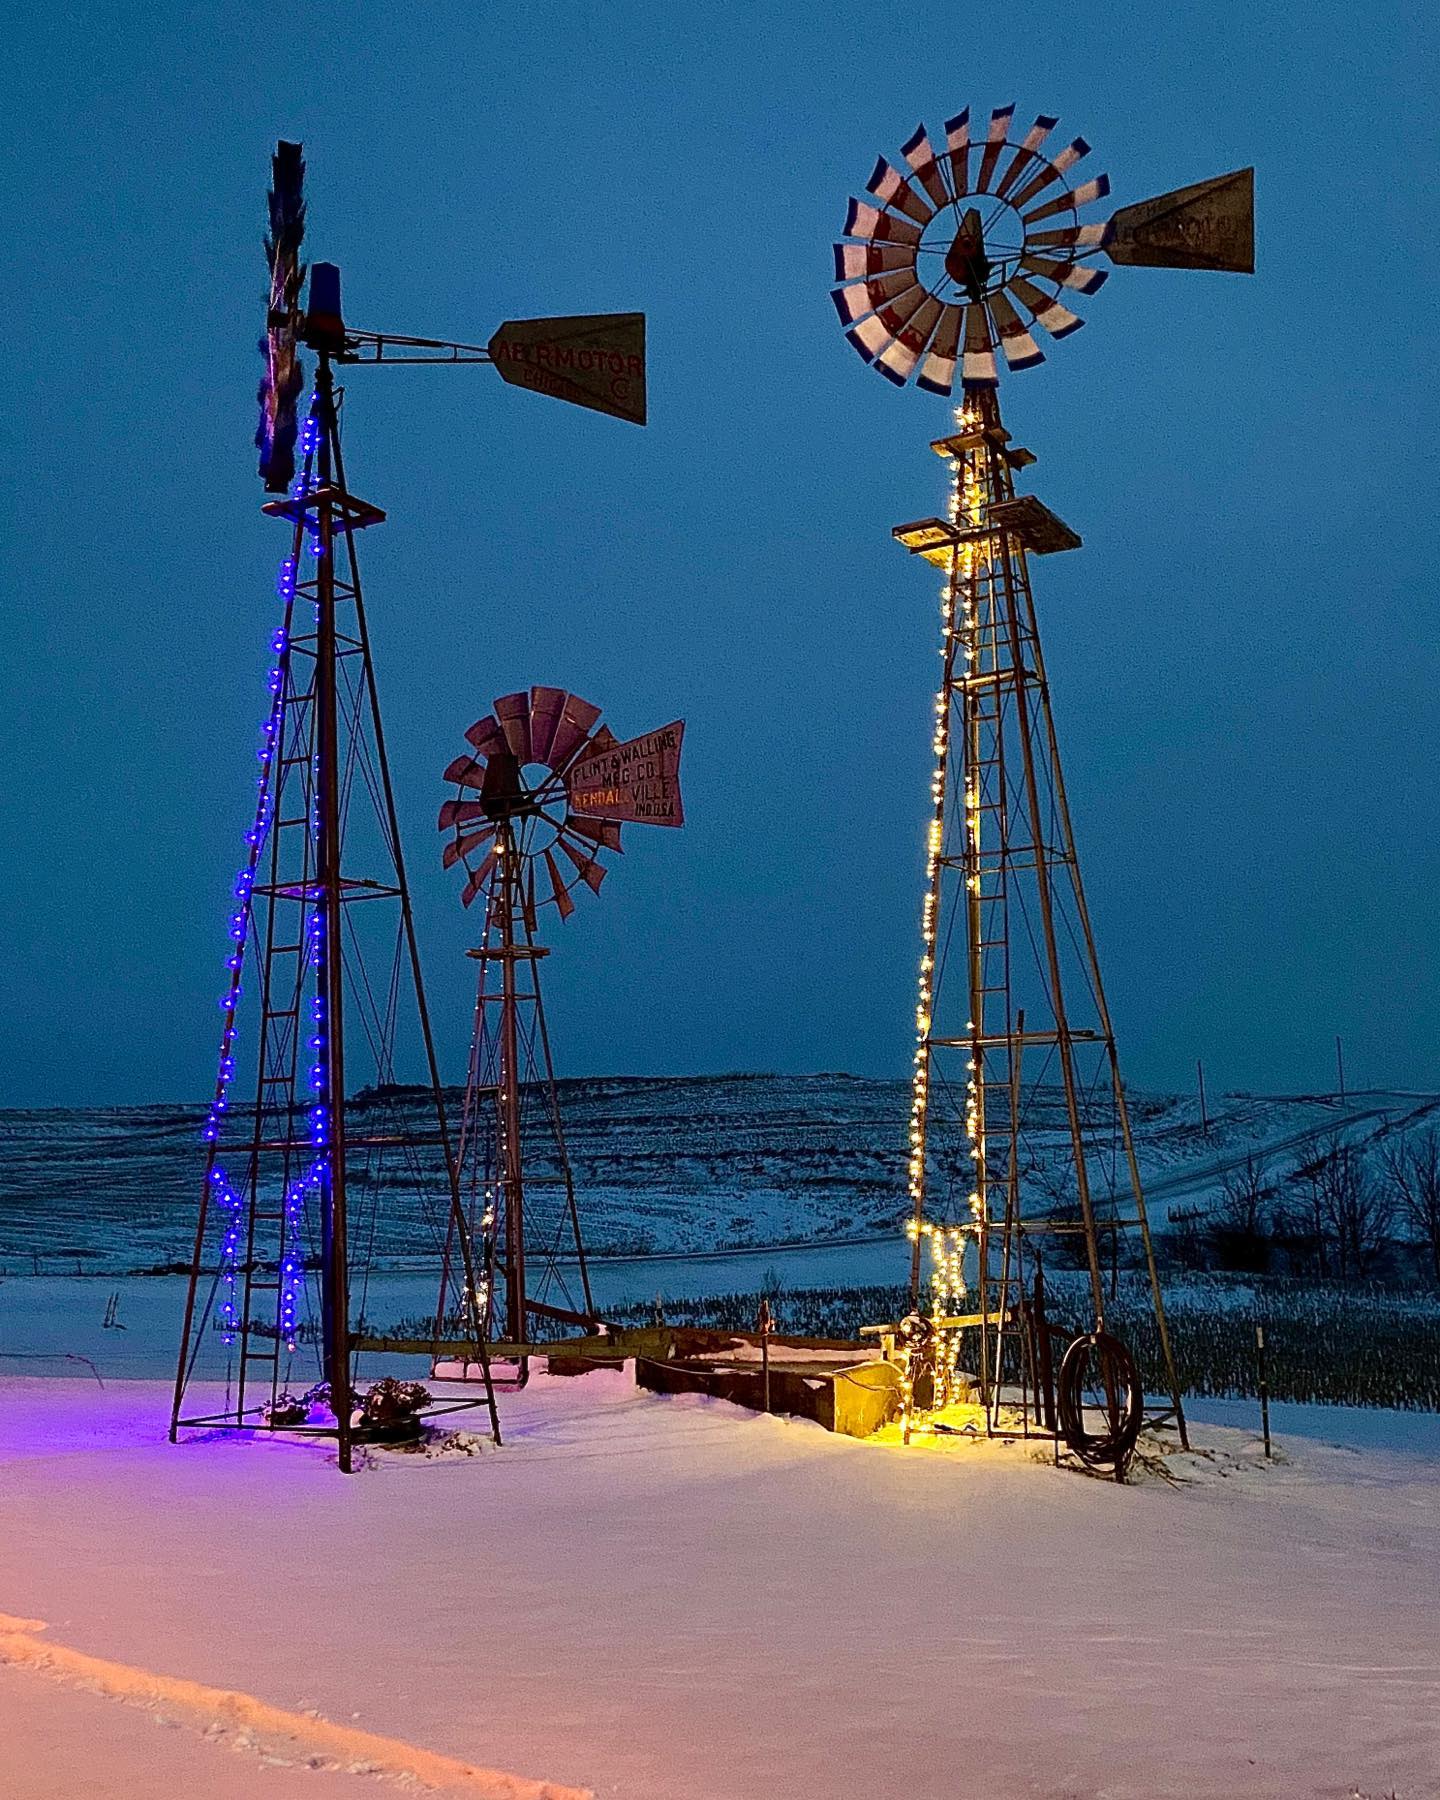 The windmills at Windmill Acres, lit for the holidays. This place offers free parking to RV’s as a member of Harvest Hosts. The proprietor, Mike Gibbs, has restored four antique windmills and has three more in his shop in various stages of repair photo by Cindy Orcutt.. #windmillacres #mikegibbs #harvesthosts #orcuttphotography #vanlife